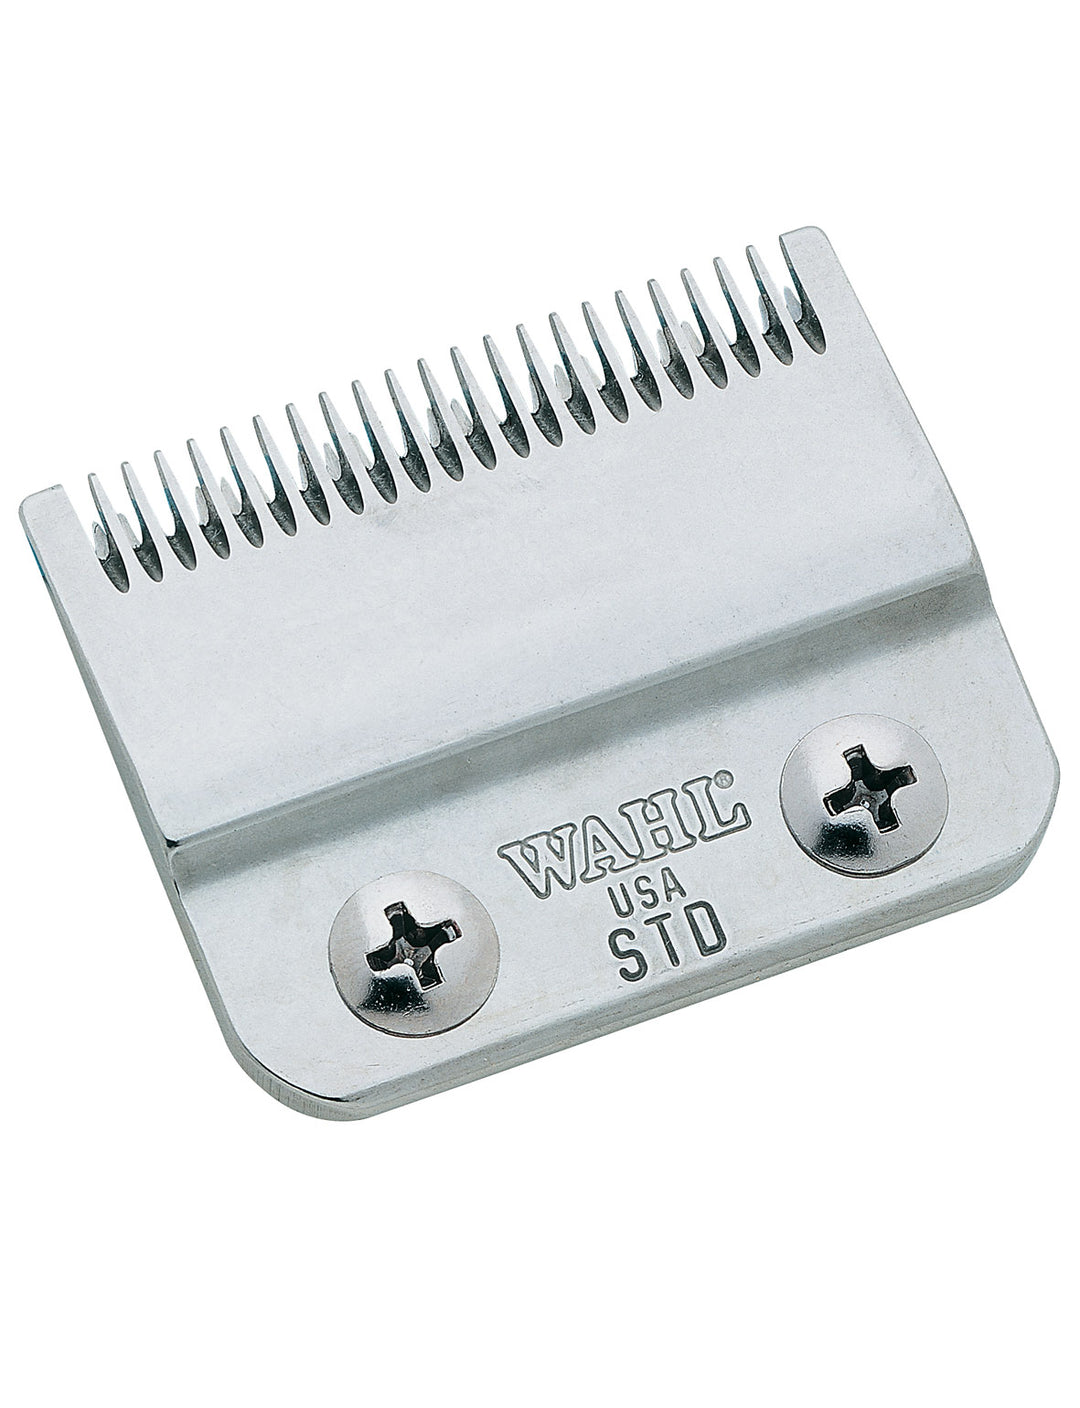  also

Staggertooth Blade Replacement Head for Cordless Magic Clip, Wahl's testing.